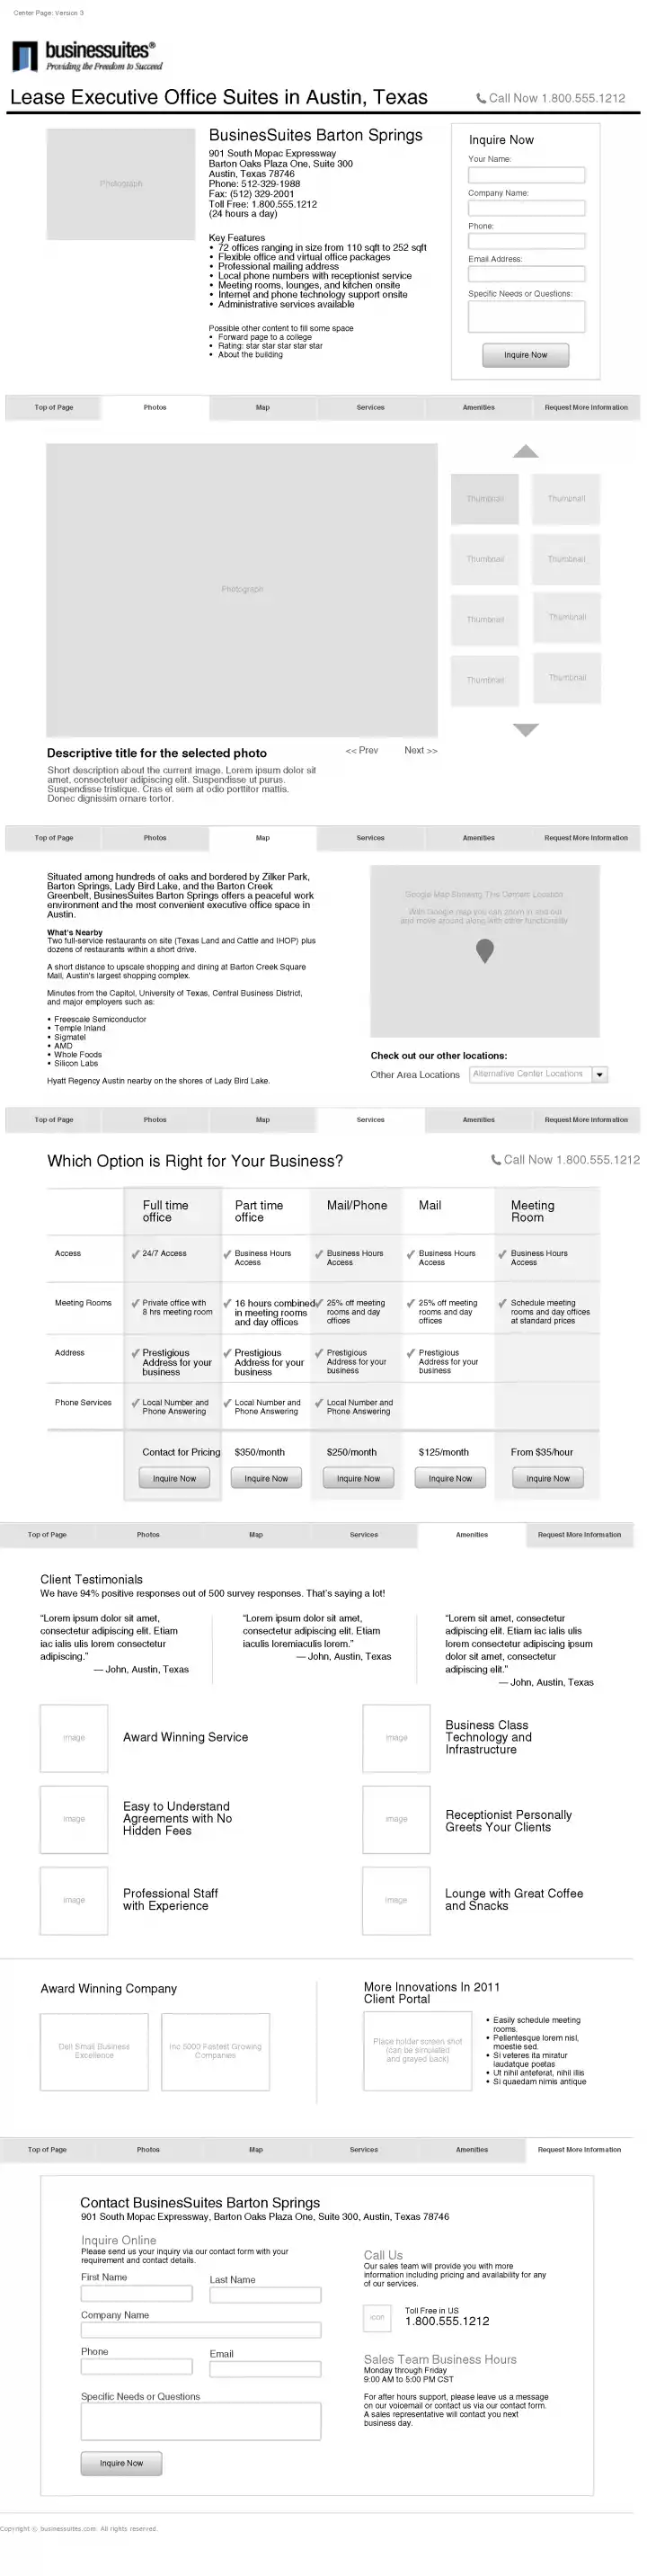 BusinesSuites Website Redesign Initial Subpage Wireframe Alternatives